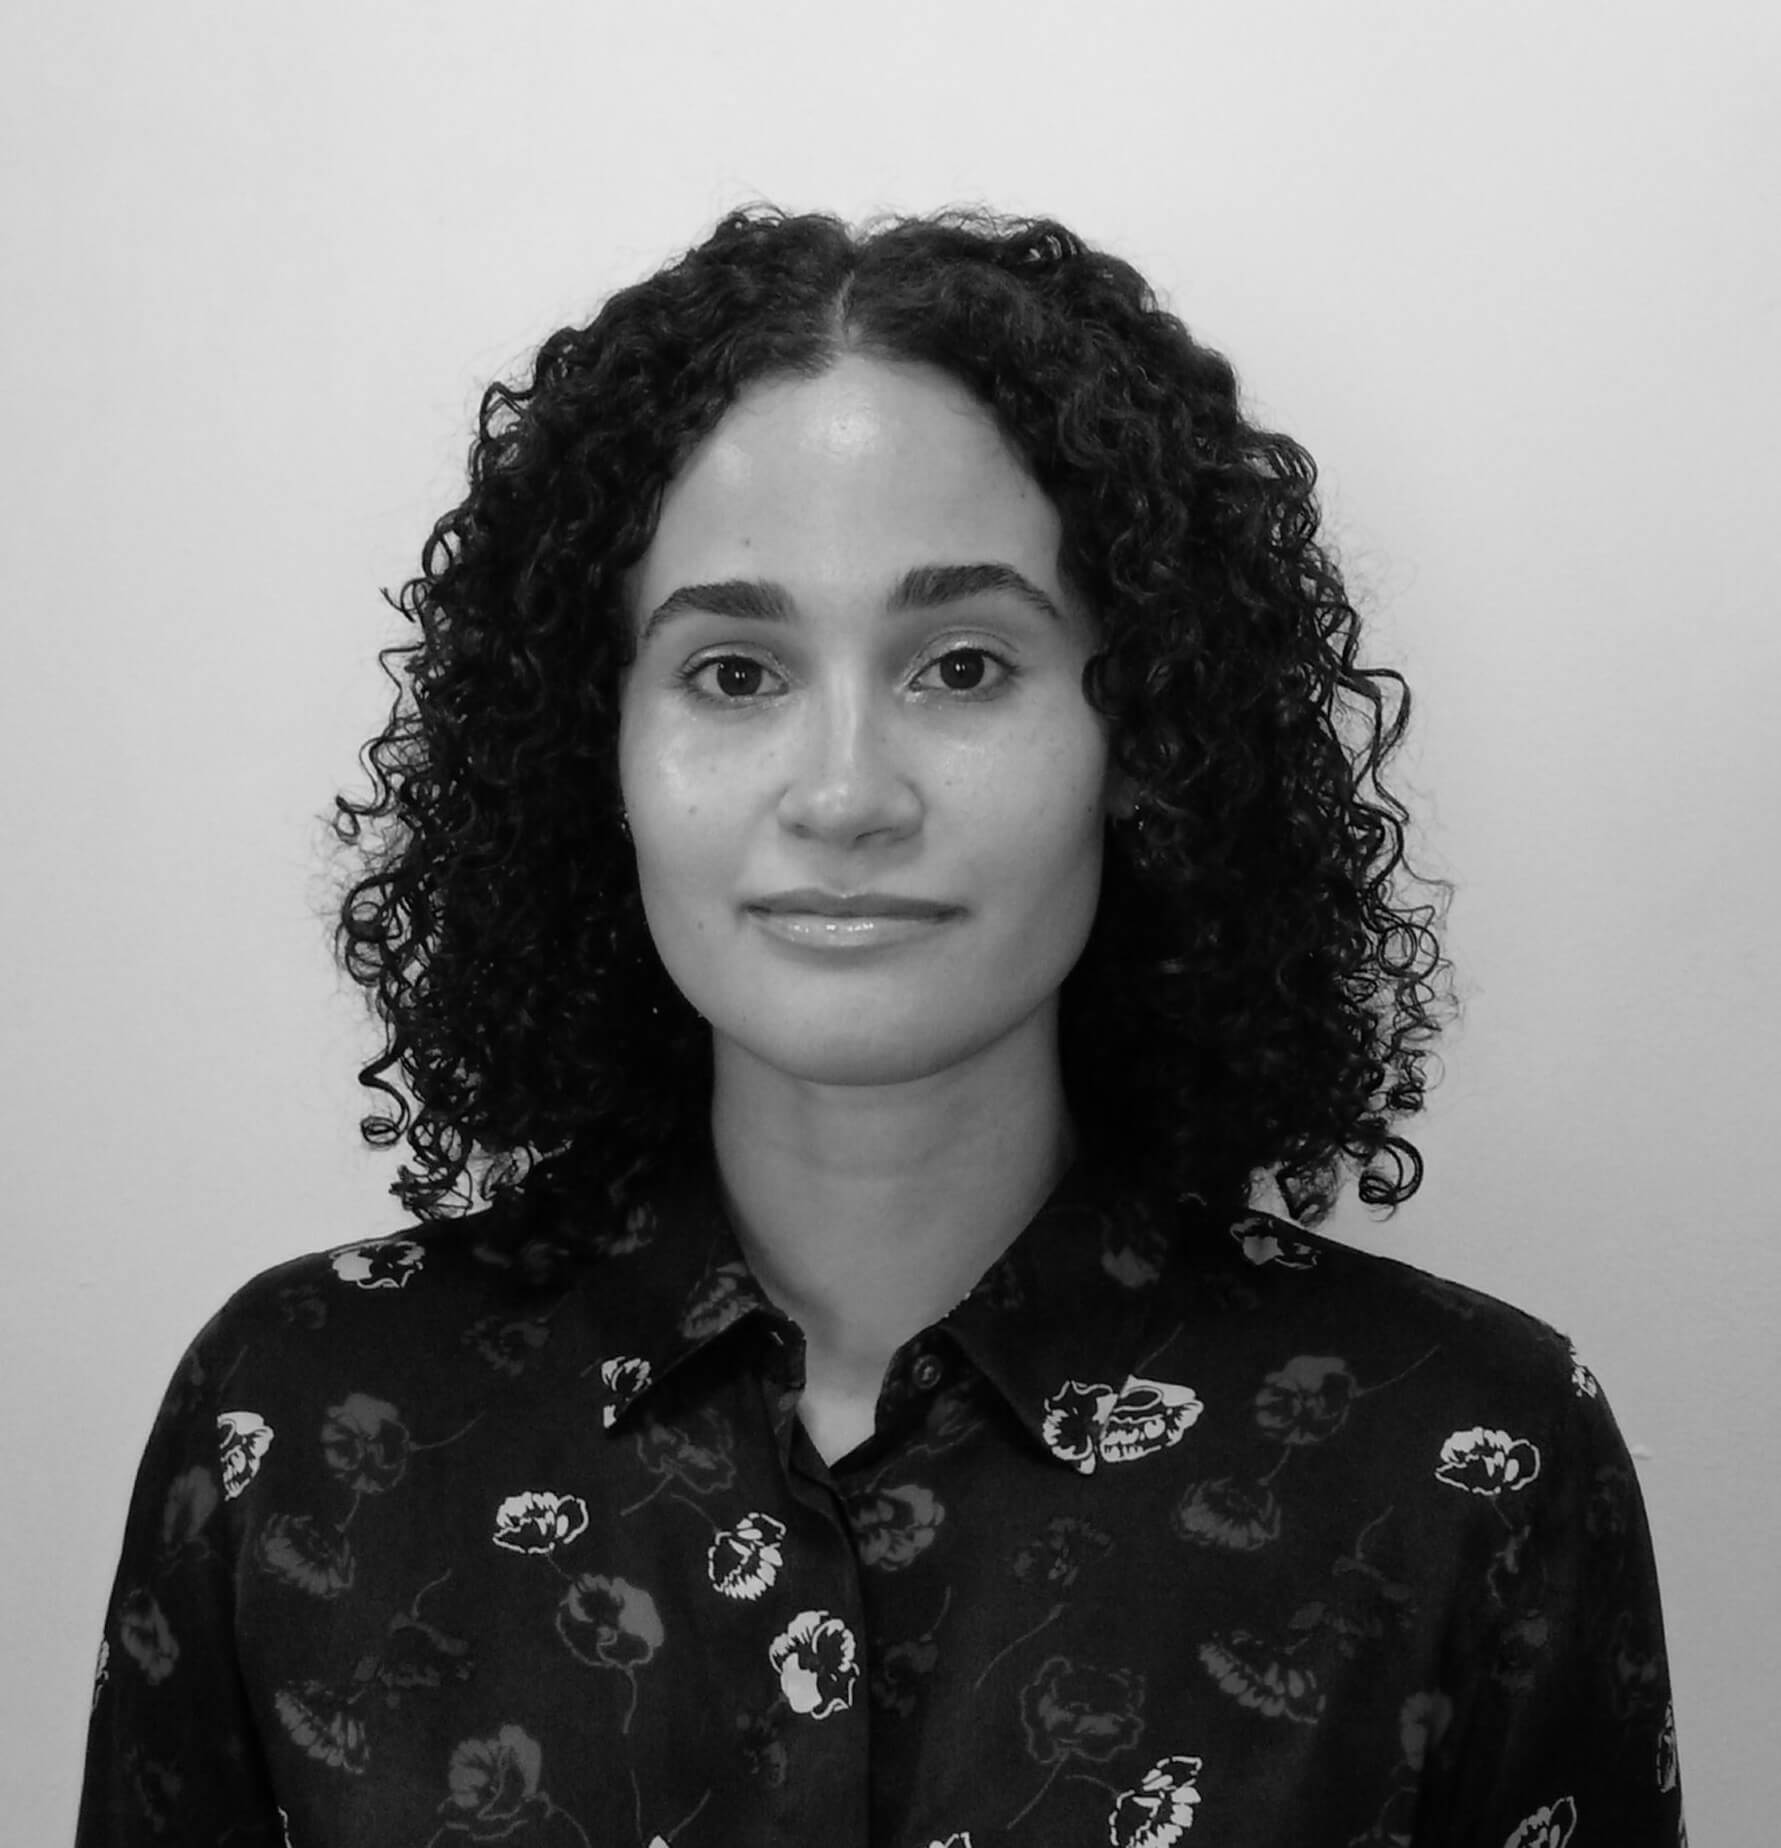 Allison Villegas Roman smiles at the camera. She has curly hair, and wears a buttoned shirt with flowers. Portrait in black and white.